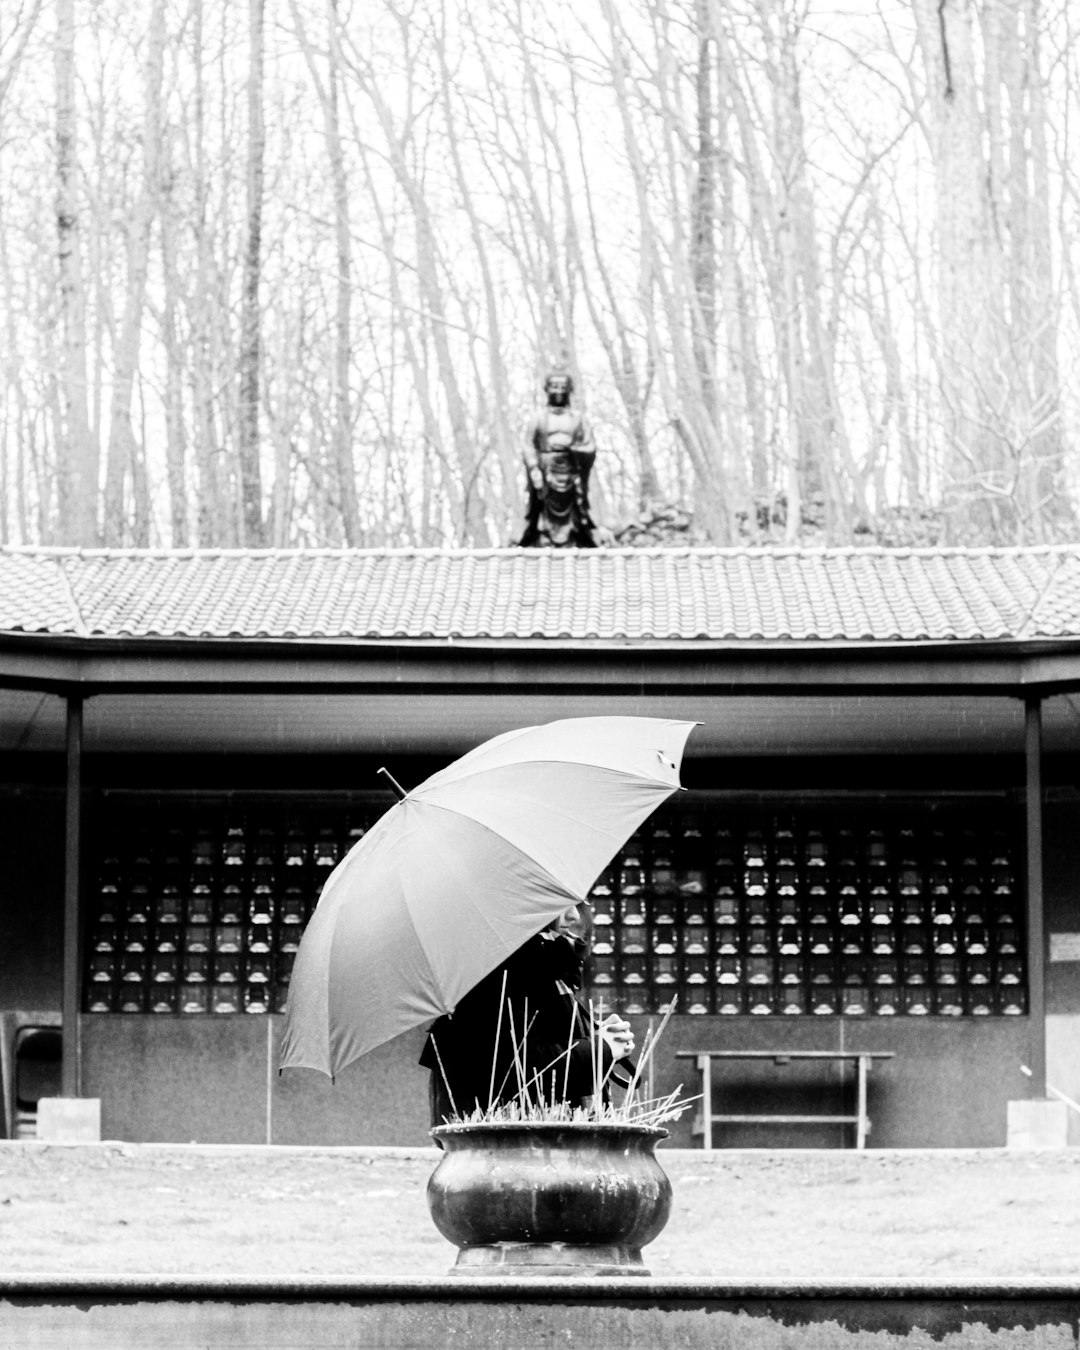 grayscale photography of person using umbrella standing and facing near historic temple